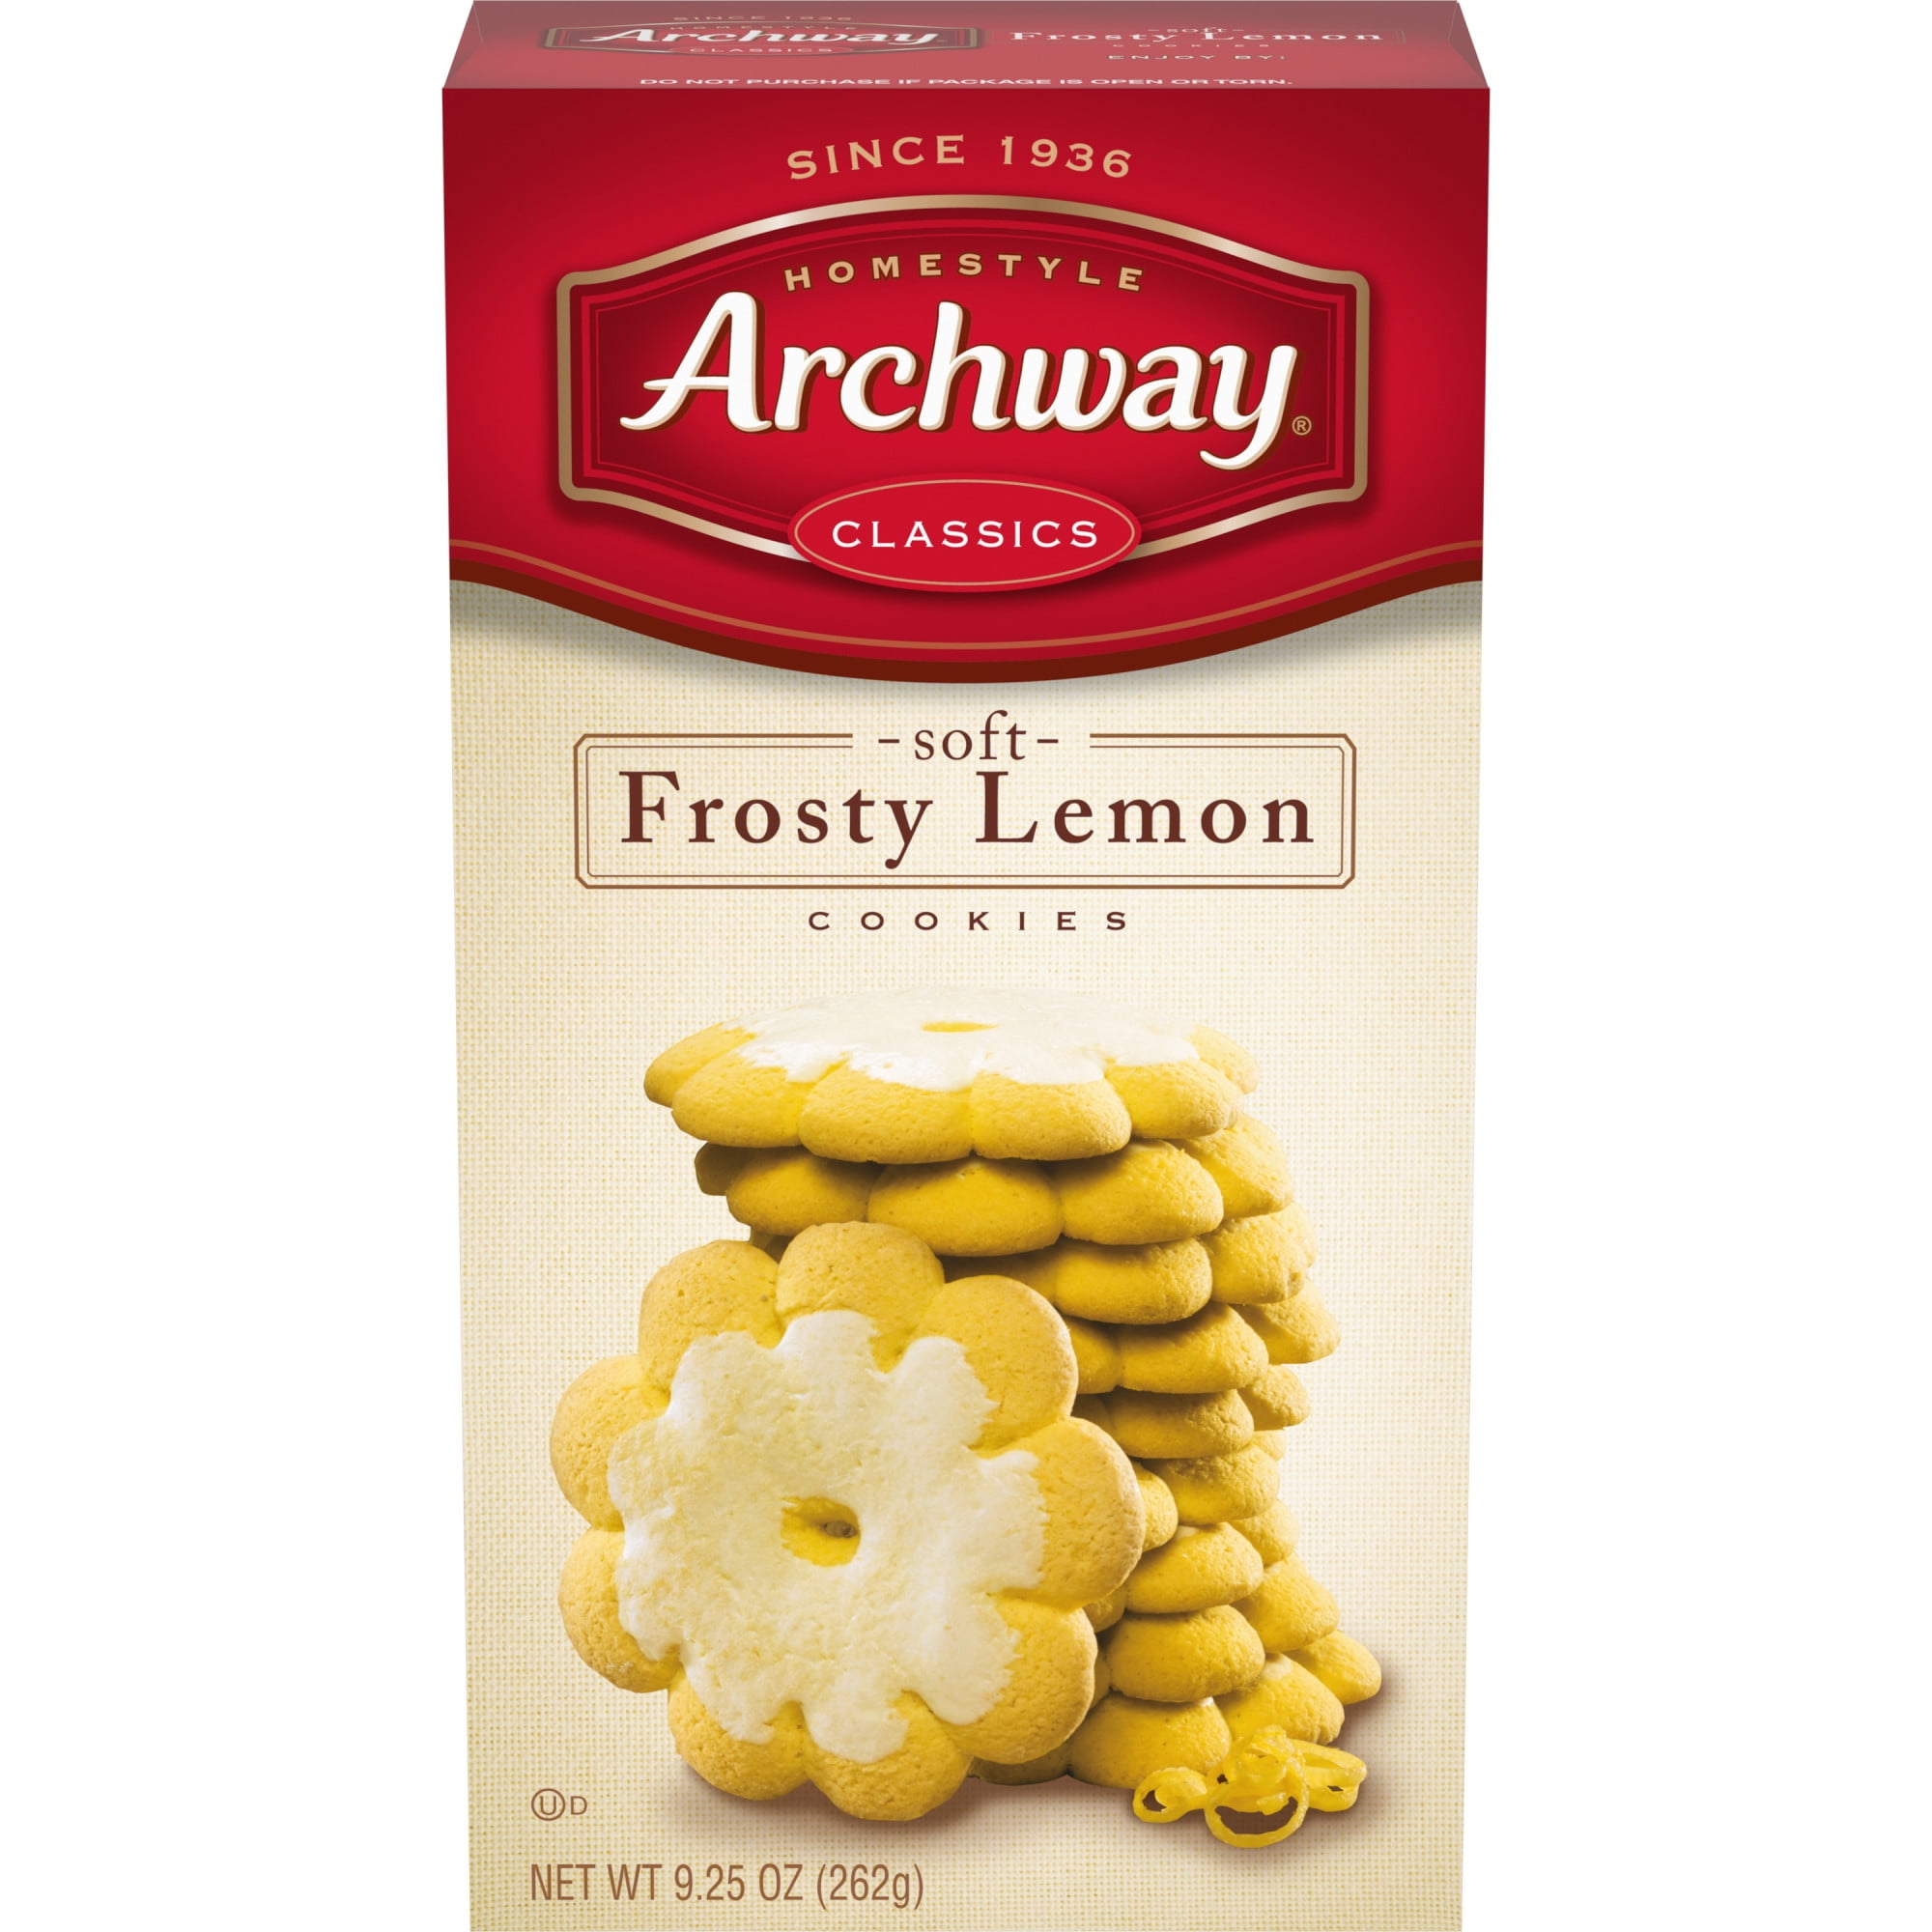 Archway Cookies, Soft Frosty Lemon Cookies, 9.25 oz